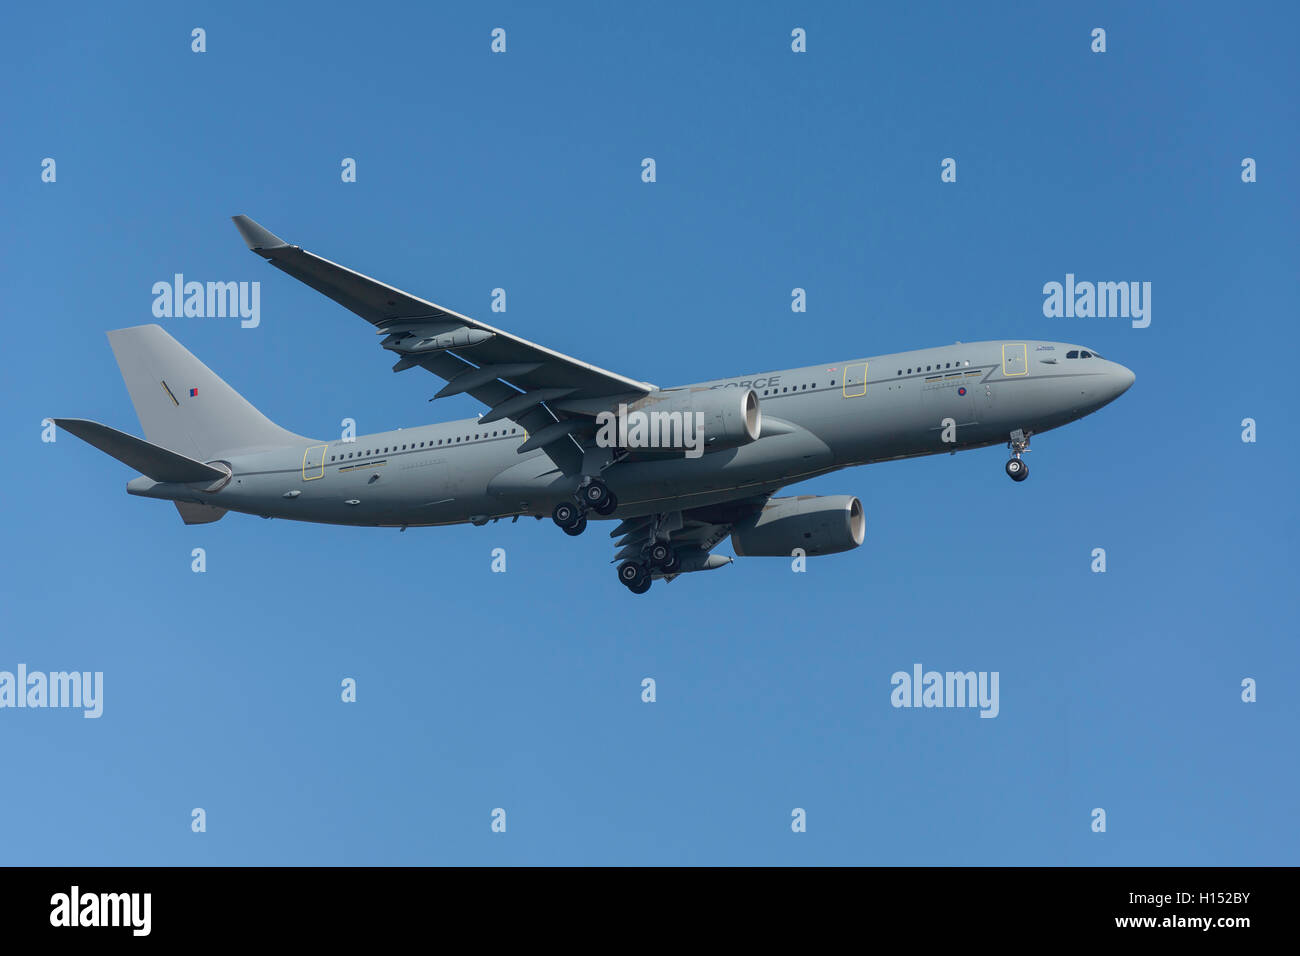 Royal Airforce Airbus KC2 Voyager aircraft landing at Heathrow Airport, Greater London, England, United Kingdom Stock Photo